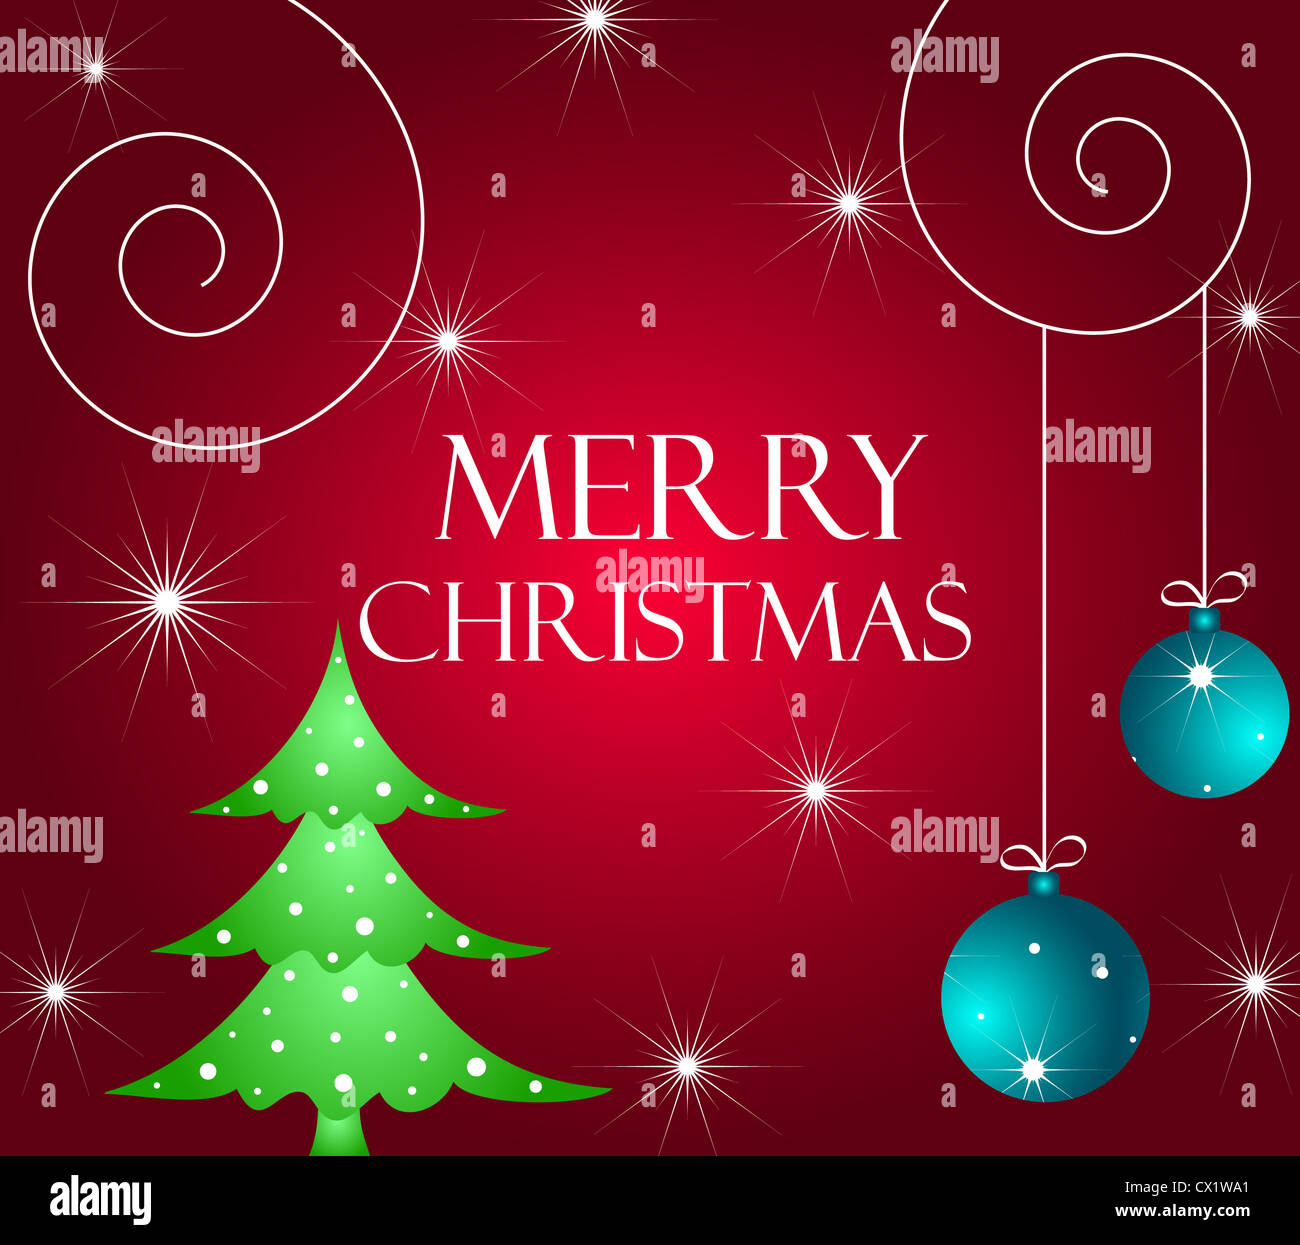 Merry Christmas greetings with tree and baubles Stock Photo